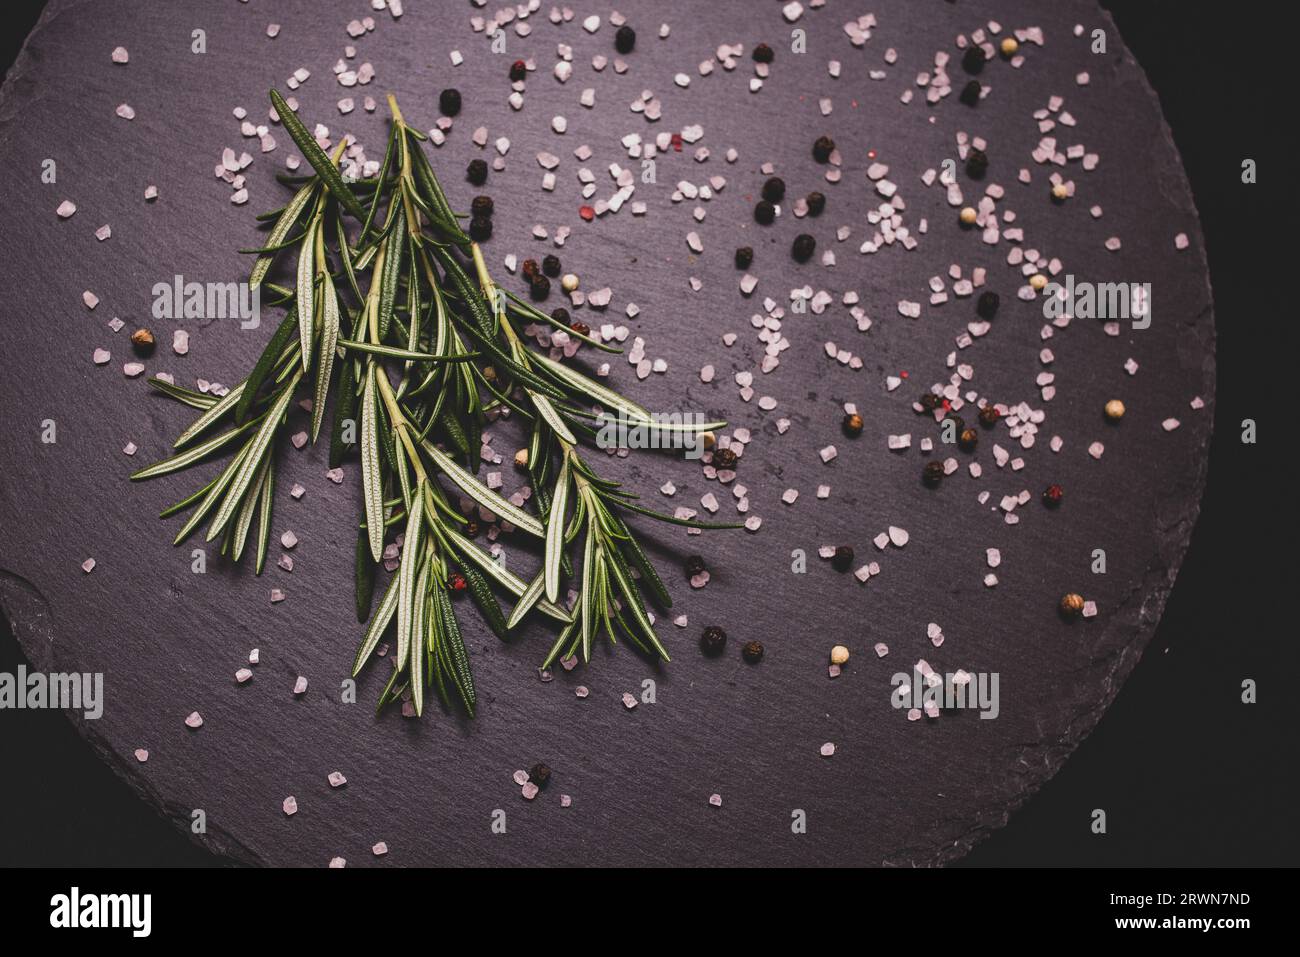 close-up bouquet of rosemary green plants on the table on a black granite plate, scattered Himalayan pink salt and black peppercorns Stock Photo